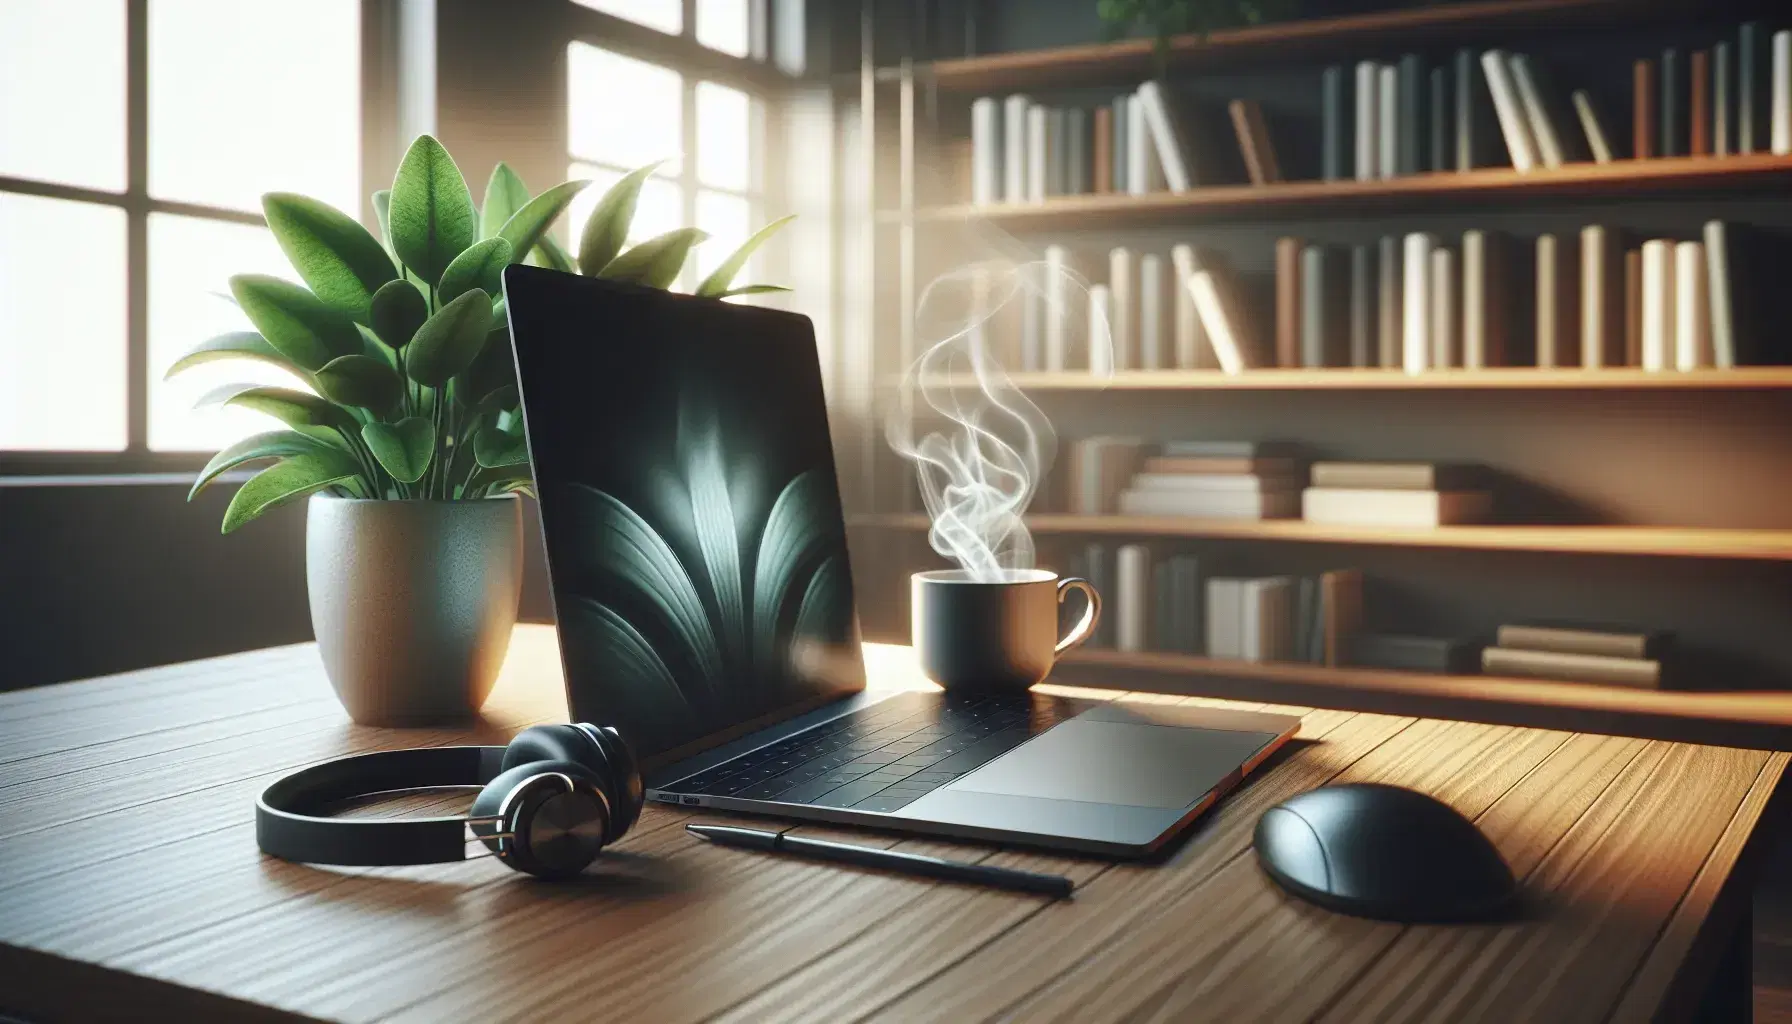 Modern office with wooden desk, turned on laptop, cup of steaming coffee, black headphones and green plant in terracotta pot.